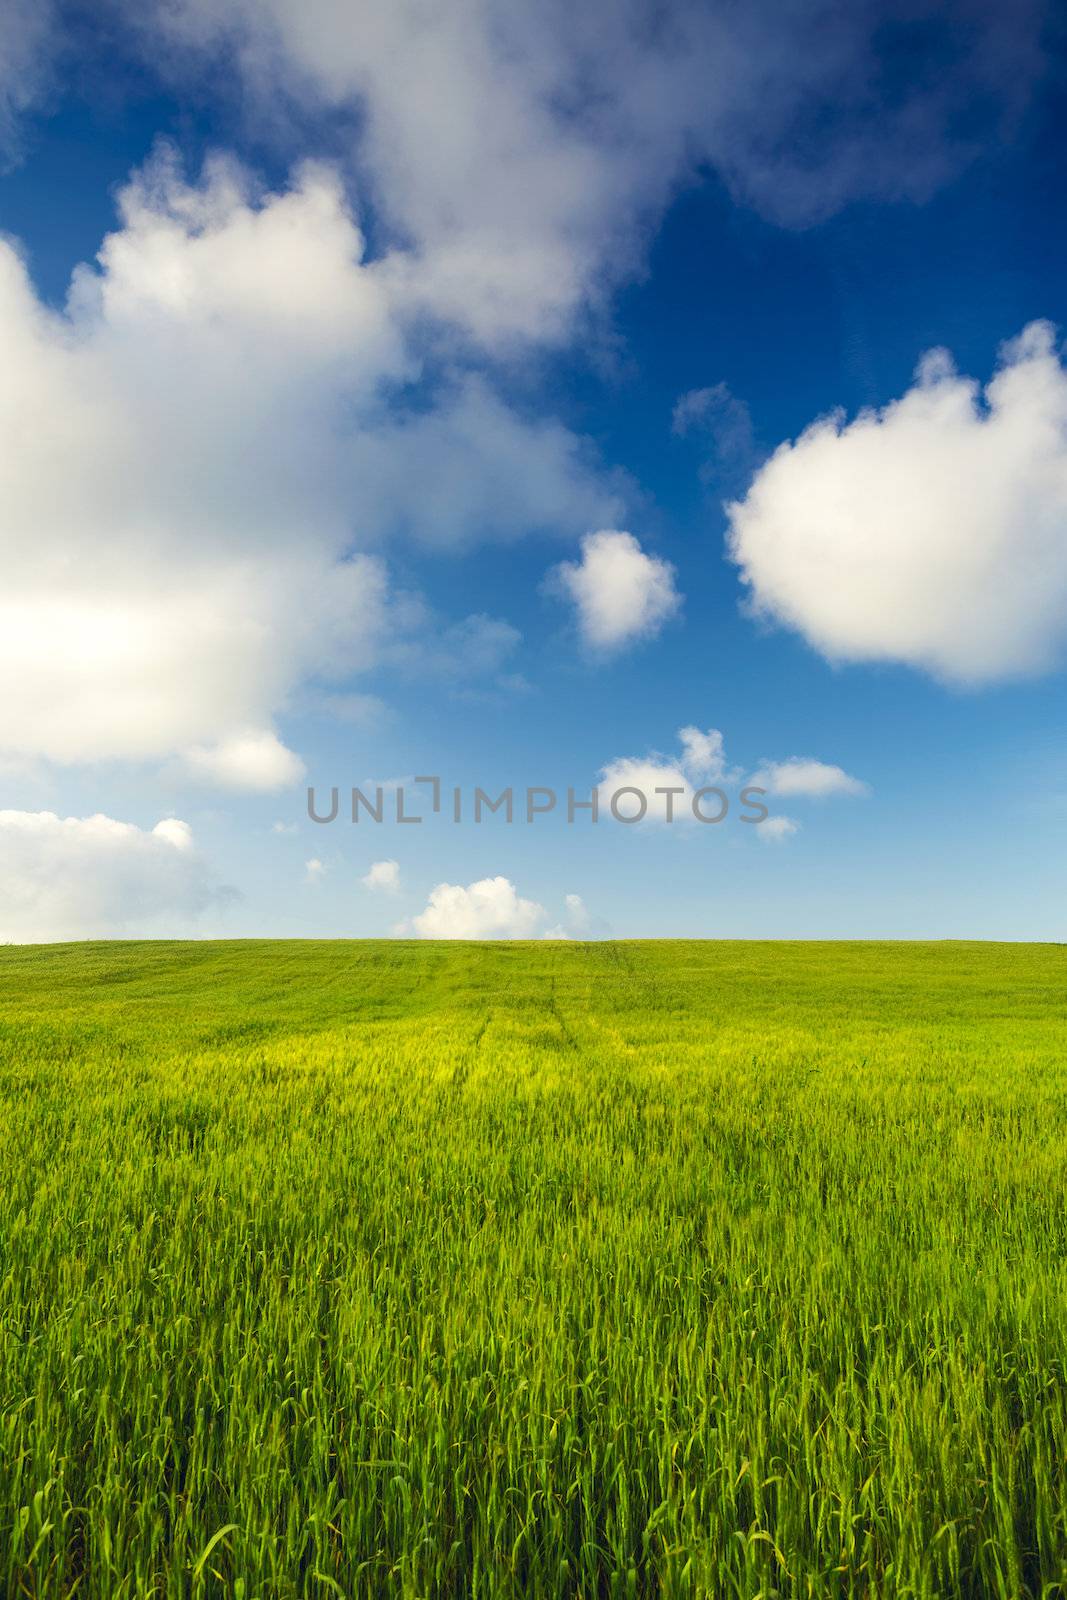 Beautiful landscape with an amazing blue sky and white clouds